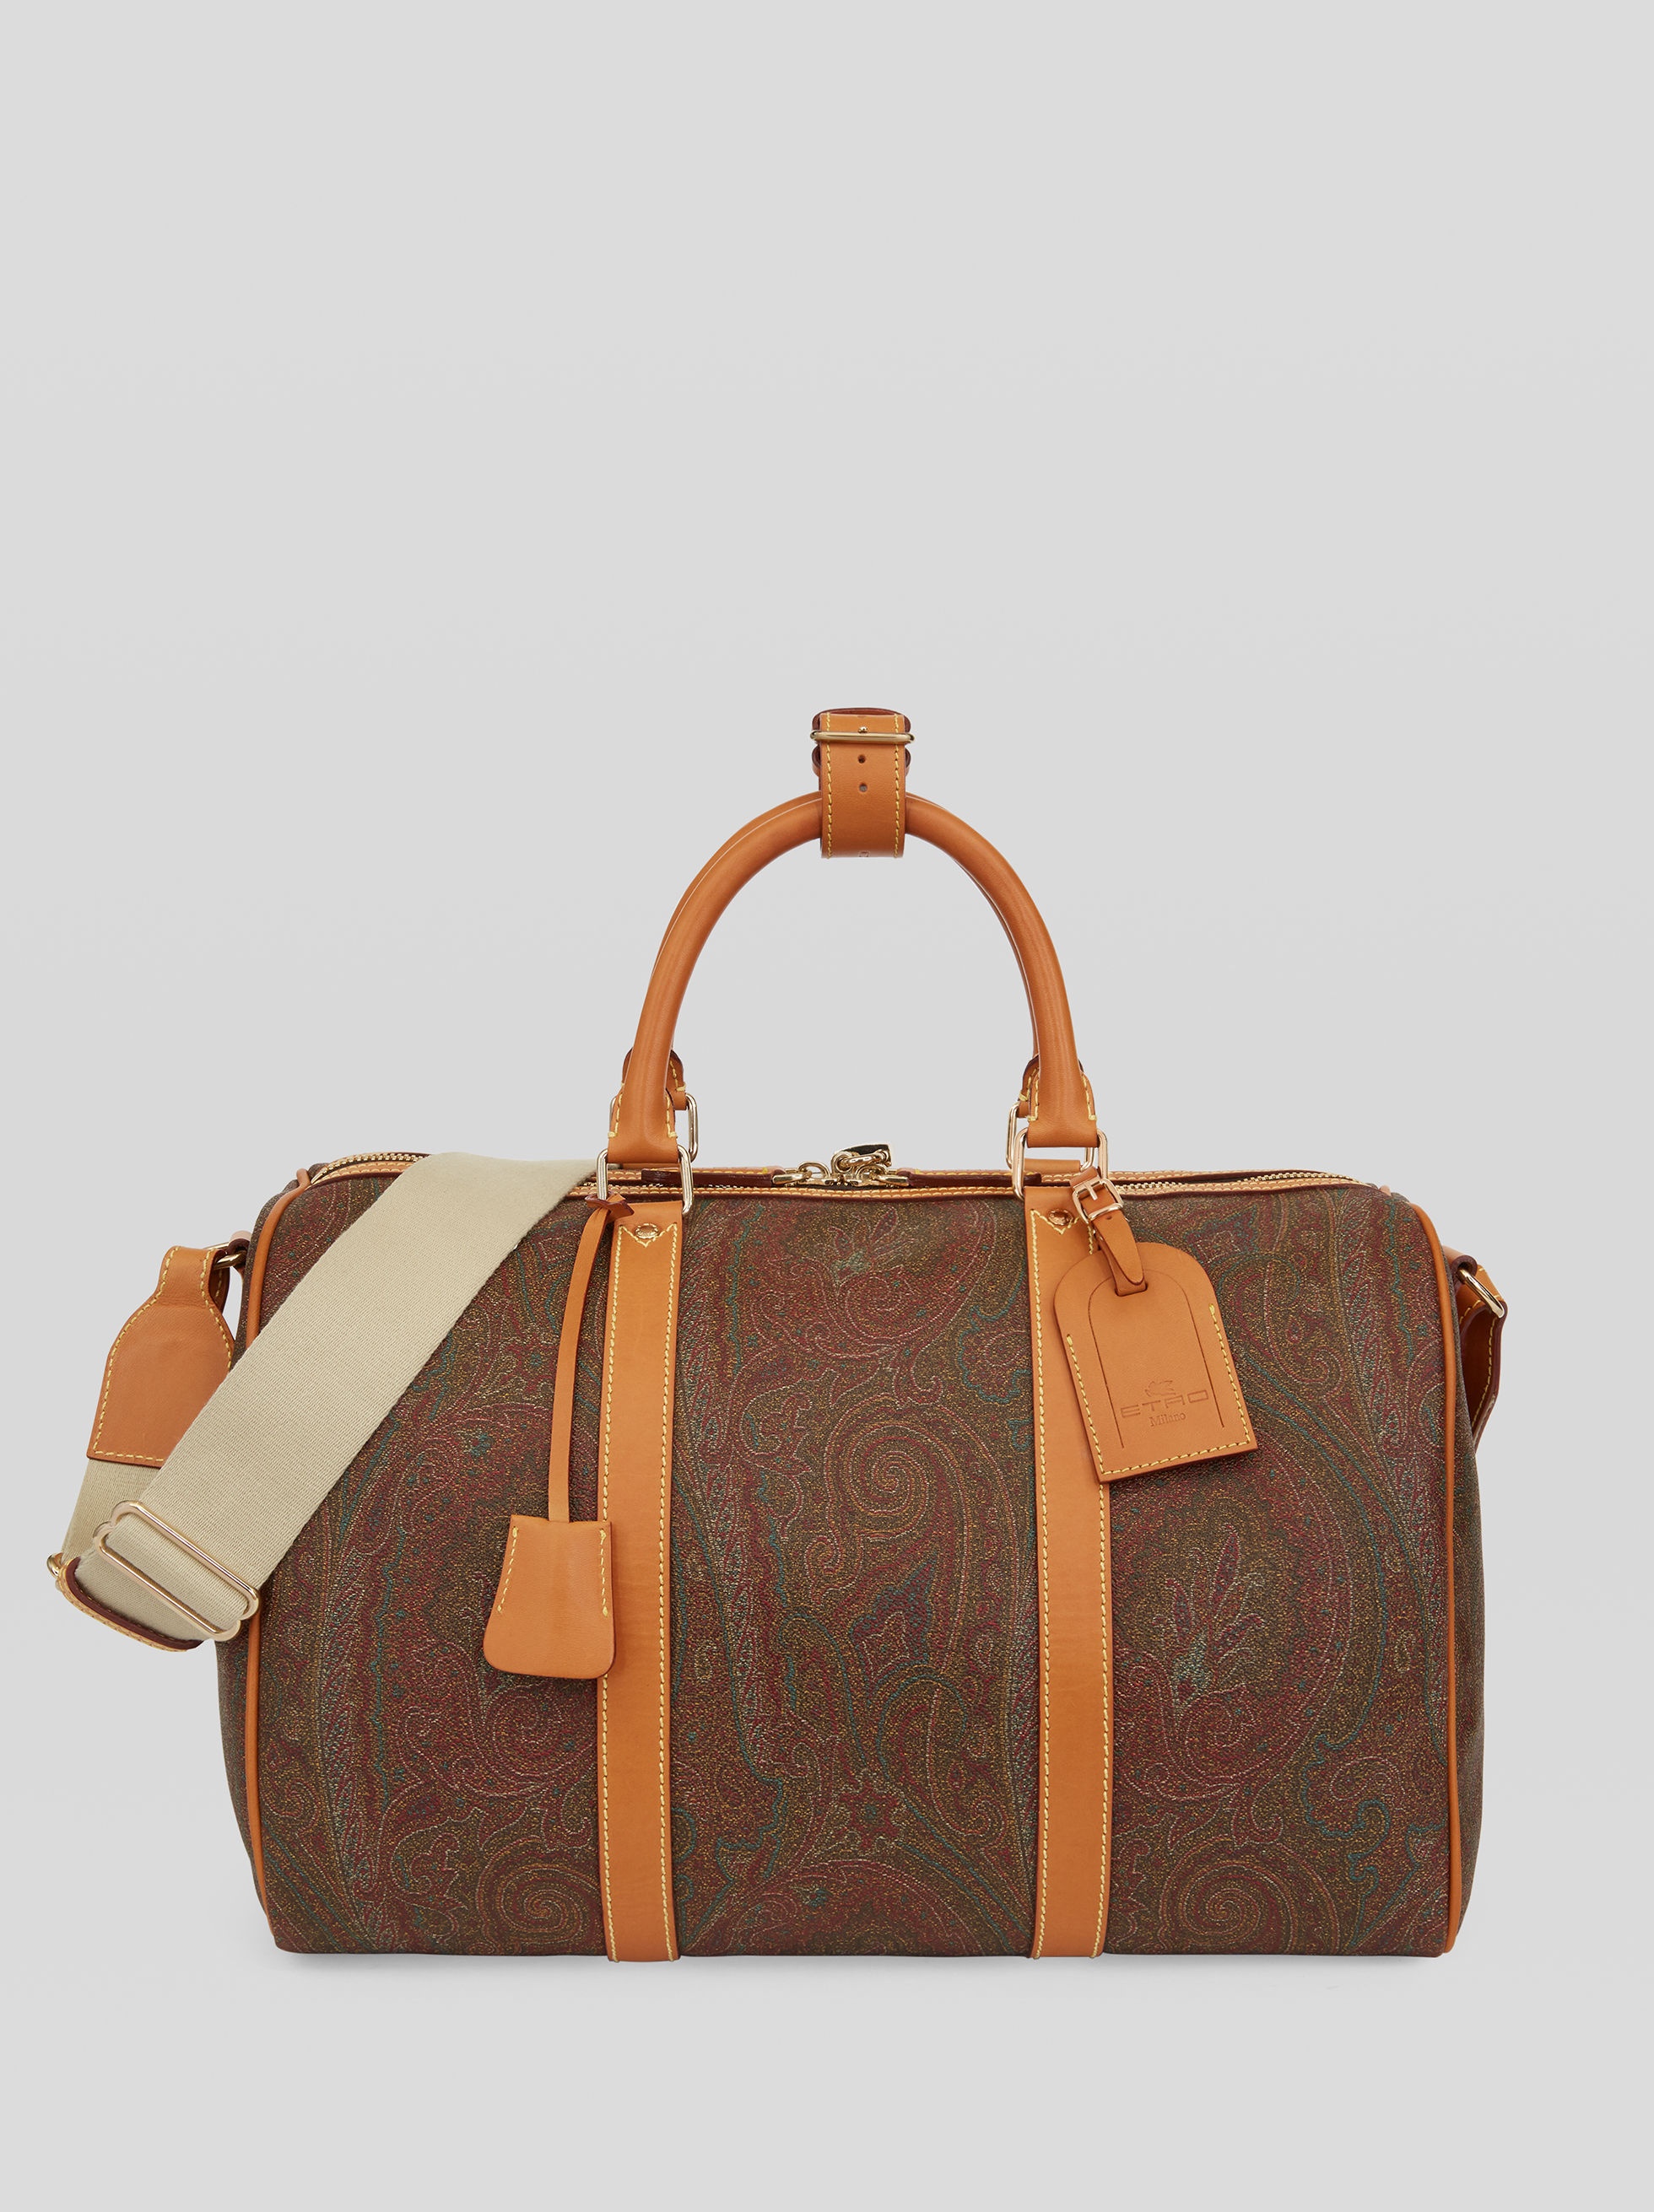 TRAVEL BAG WITH PAISLEY MOTIFS - 1